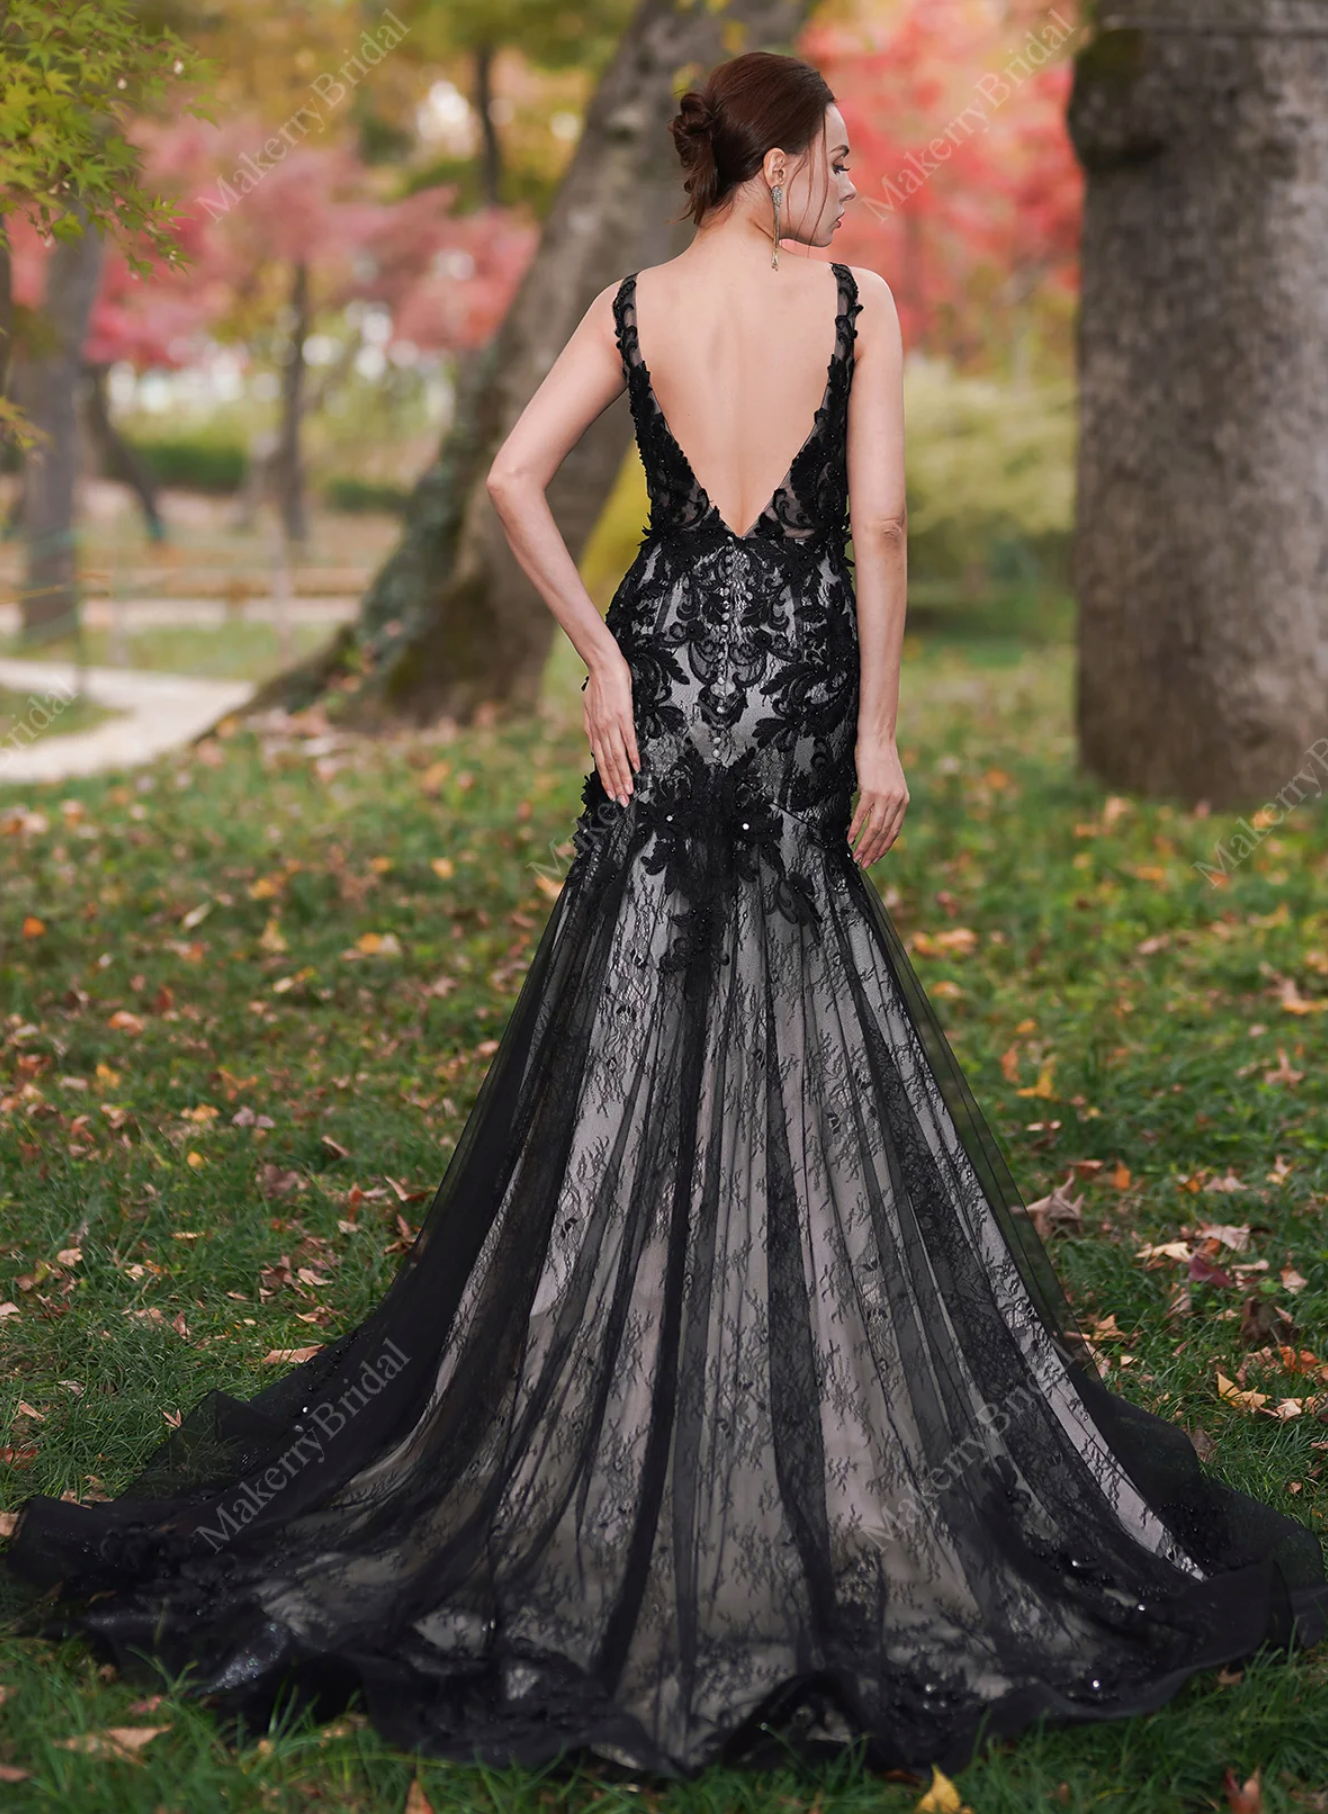 Black Lace Appliques Tulle Long Sleeves V-Neck Floor-Length Wedding Dresses  Chapel Train Custom Made Bridal Gowns - AliExpress